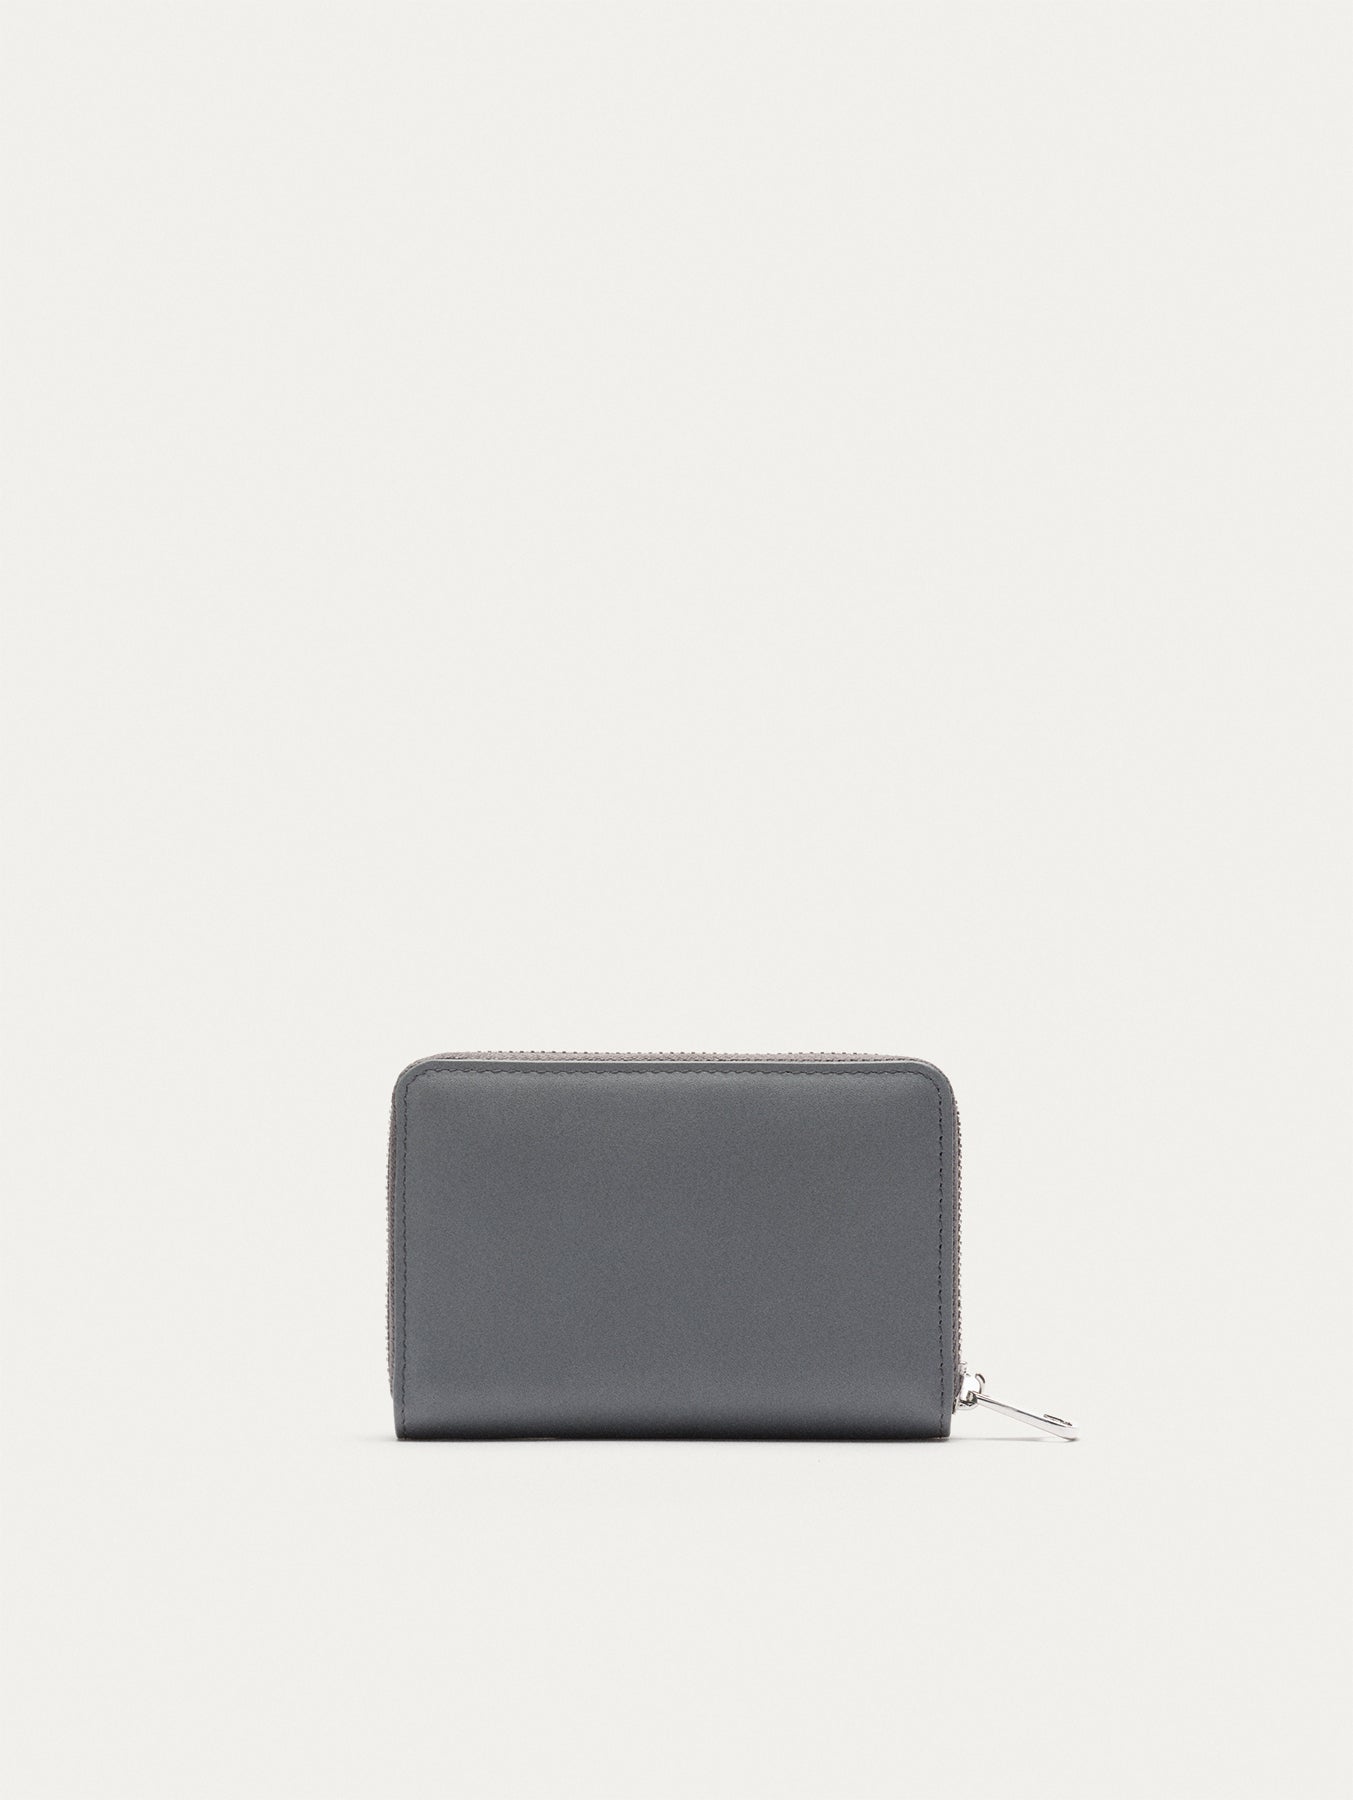 LEATHER GREY WALLET 